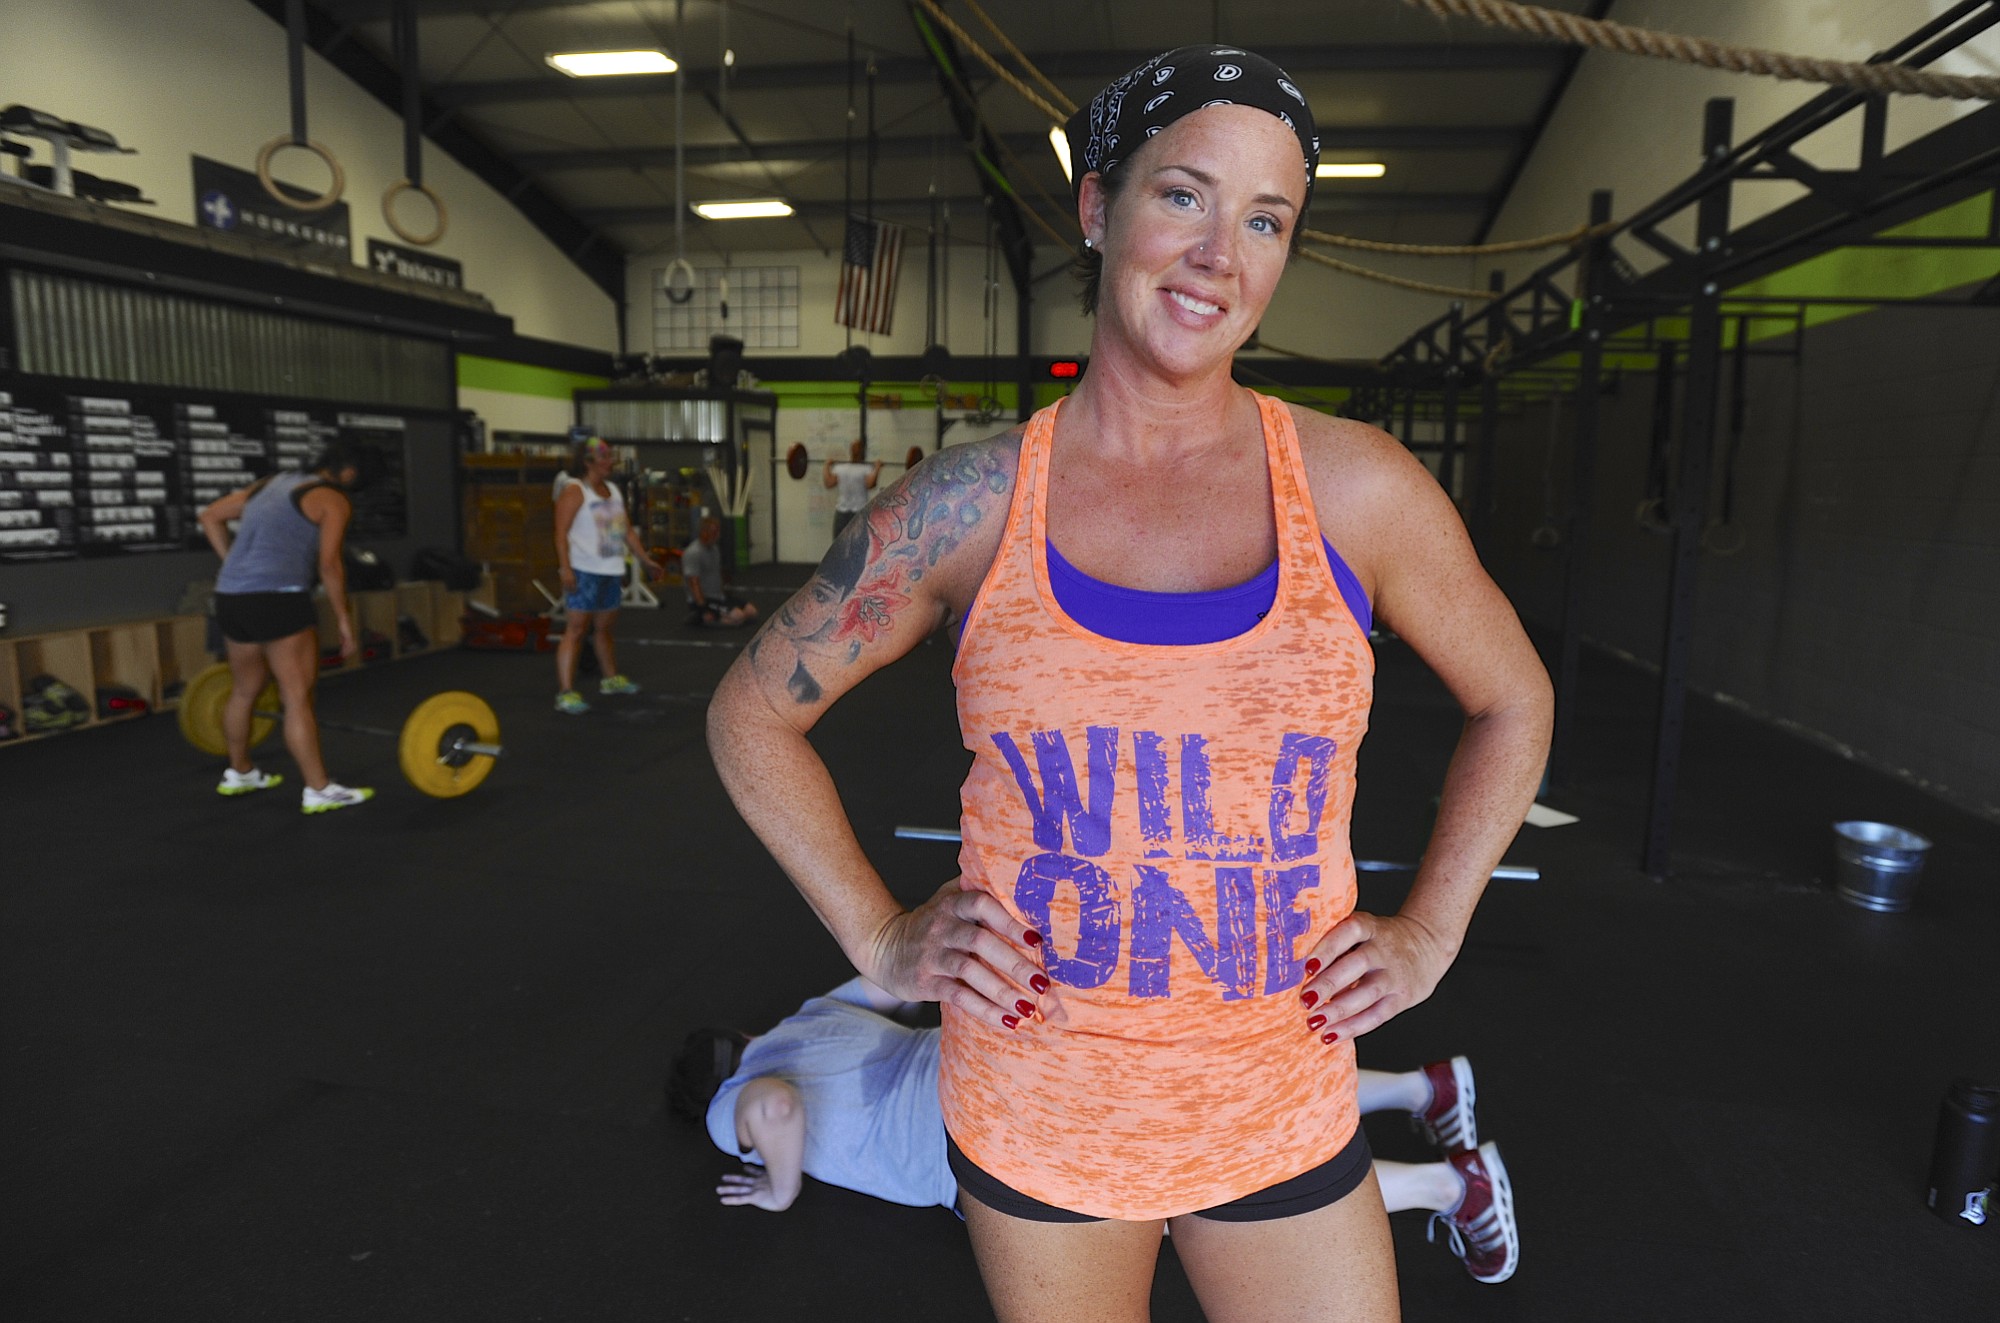 Susan Gotshall, 43, said CrossFit put her the best position -- physically, mentally and emotionally -- to go through her breast cancer diagnosis, surgery and recovery.